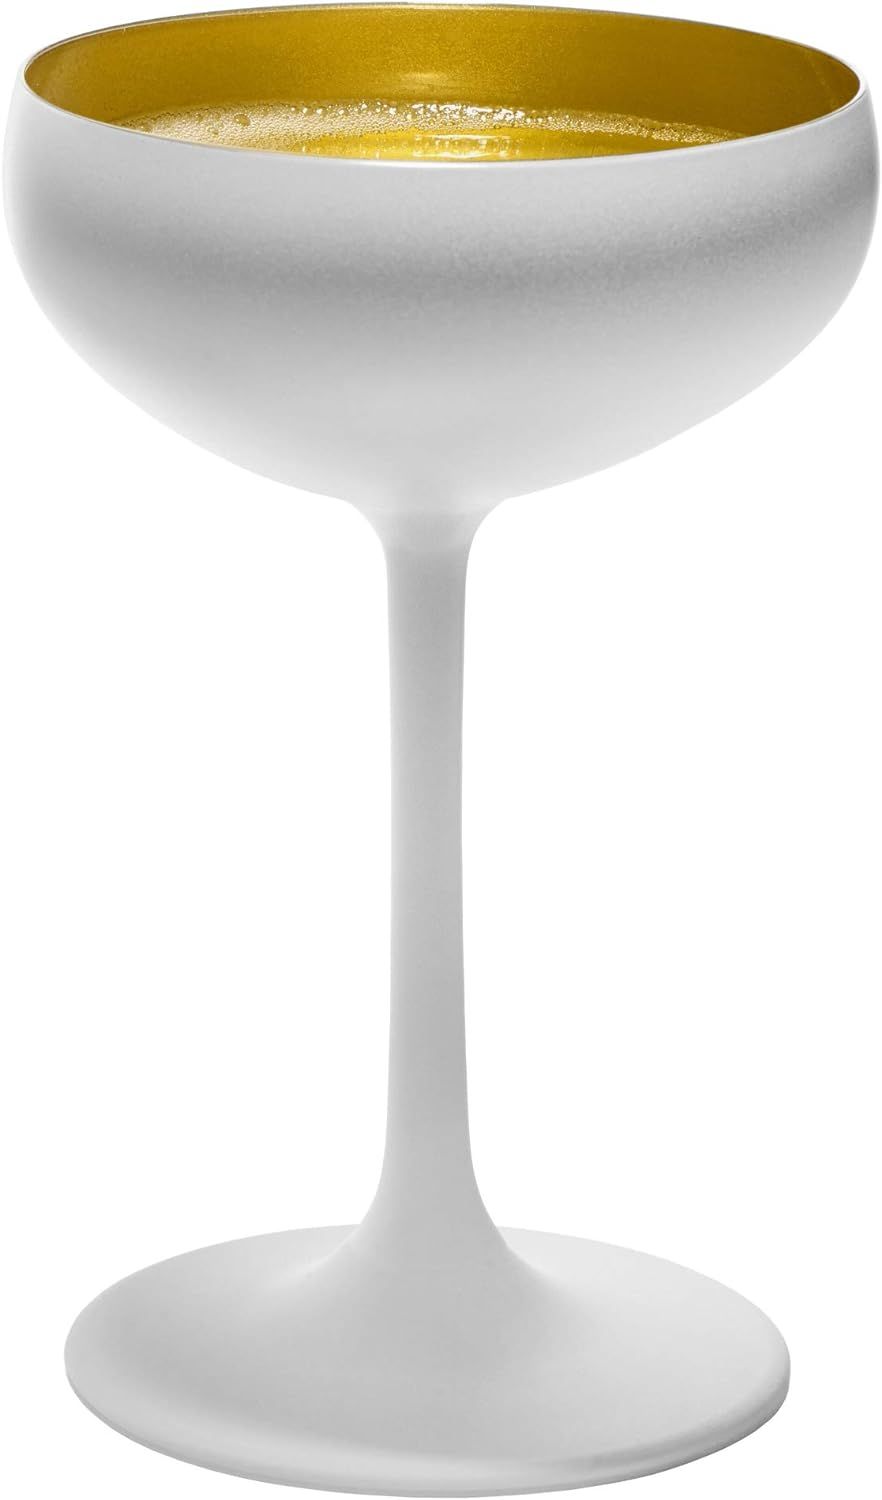 Stolzle Lausitz Olympia White and Gold Champagne Saucer Coupe Glass, Set of 2 | Amazon (US)